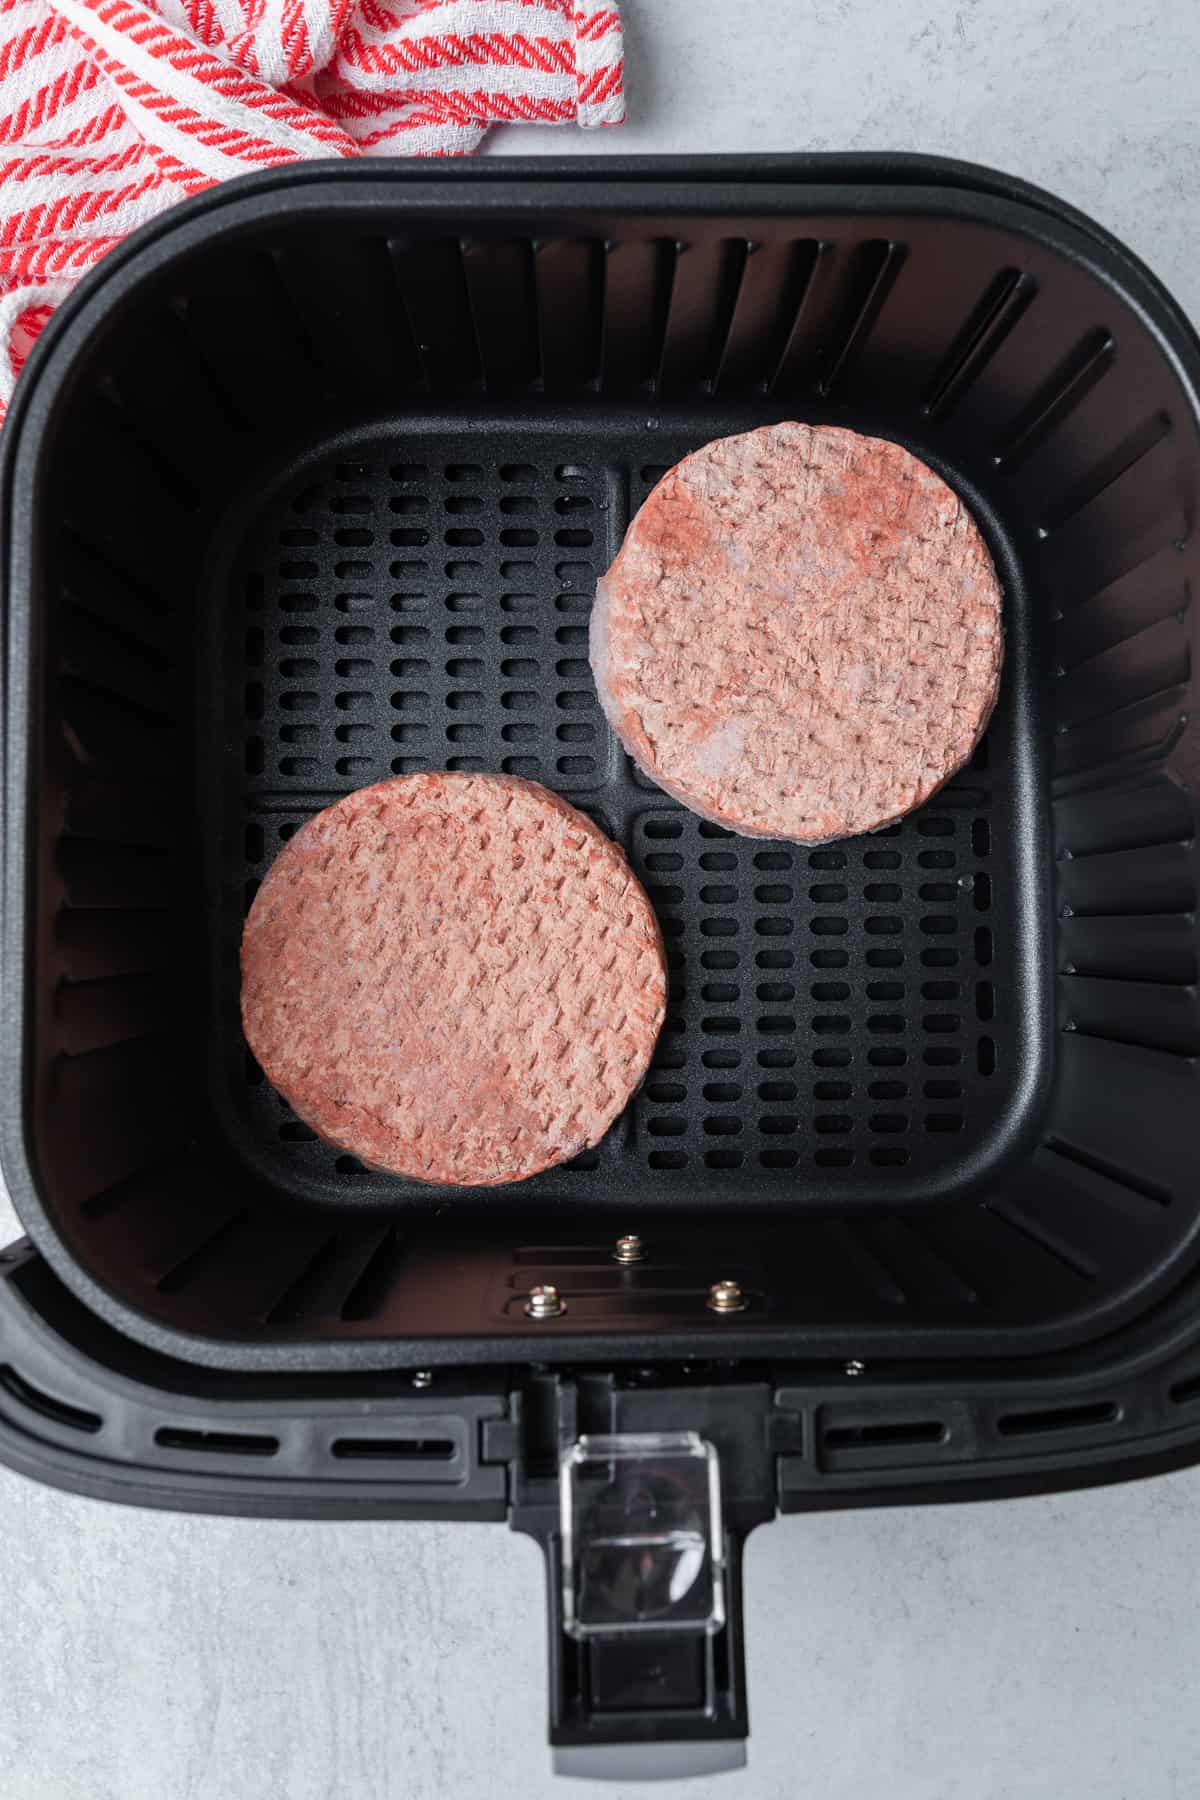 2 burger patties being cooked in a cosori air fryer